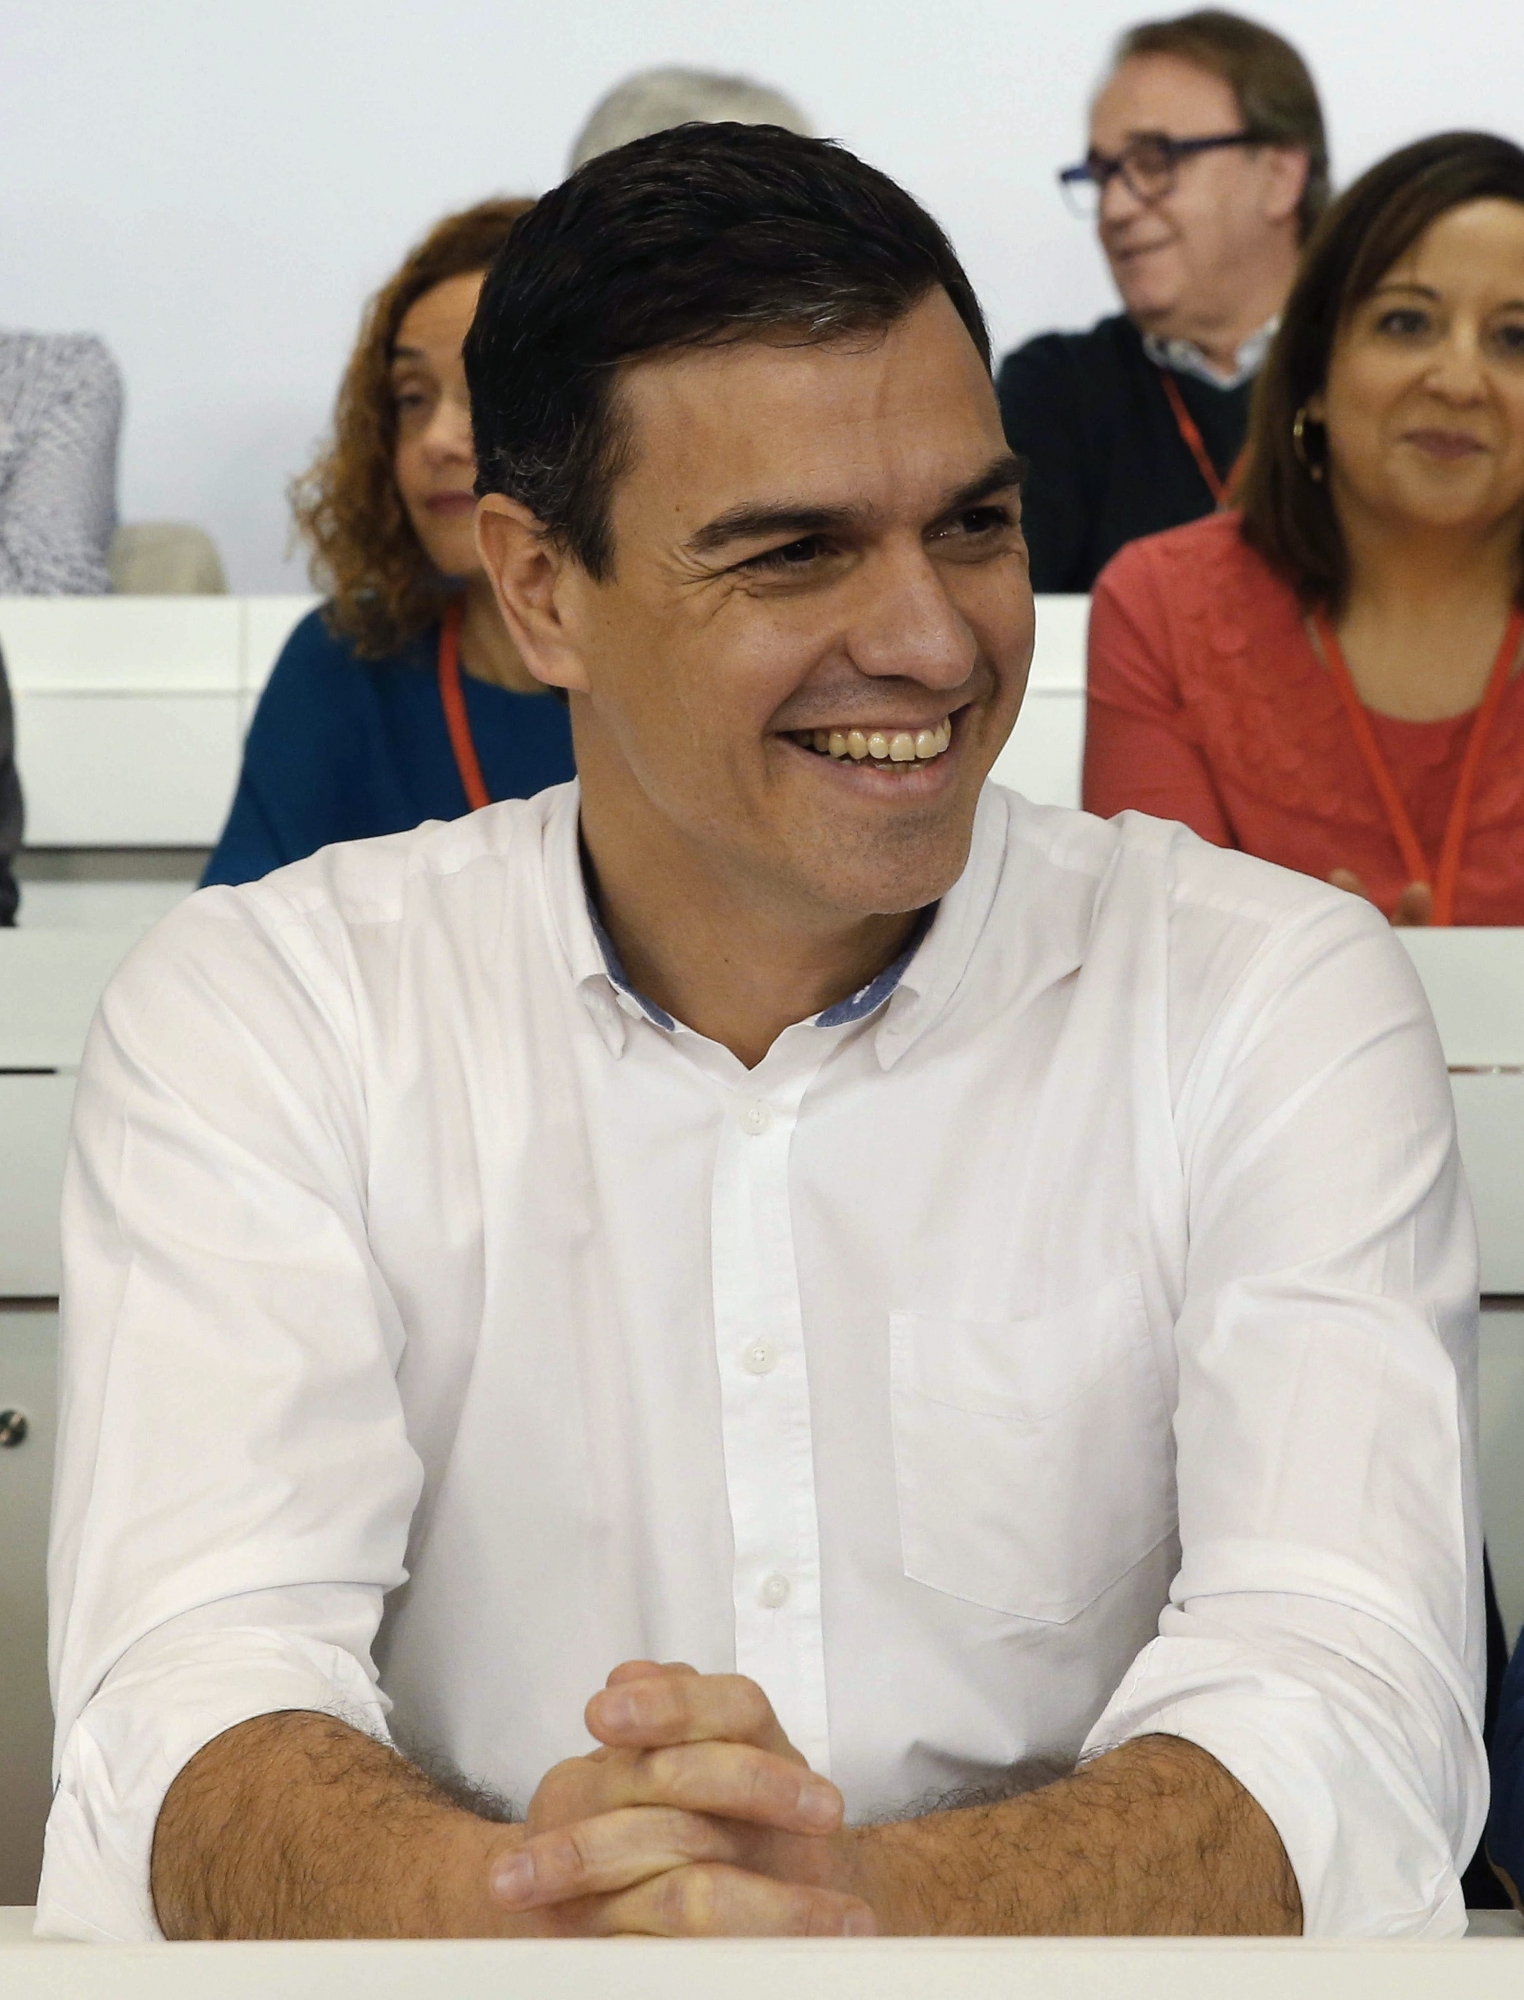 epa05134620 Leader of the Spanish socialist party PSOE, Pedro Sanchez, smiles during the party's Federal Committee held at Madrid, Spain, on 30 January 2016. PSOE has announced the party's Federal Congress for 20, 21, 22 May in order to choose a new general secretary. Spain continues on its way to a new government formation in which no party has enough votes to lead the country. If no agreement is achieved, in order to vote for a new Prime Minister at the Lower House before the deadline, new elections will be called.  EPA/PACO CAMPOS SPAIN PARTIES PSOE